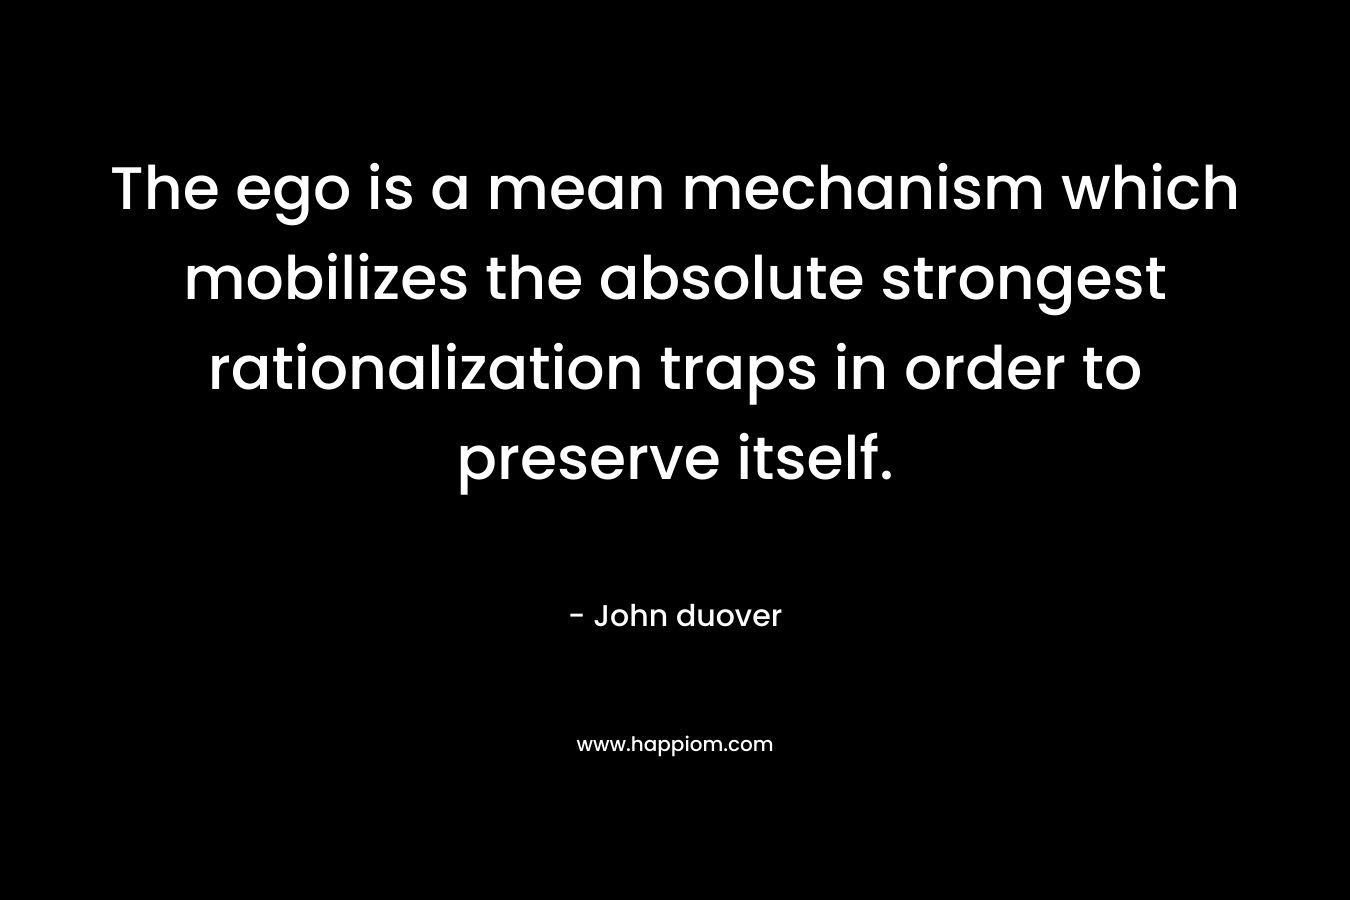 The ego is a mean mechanism which mobilizes the absolute strongest rationalization traps in order to preserve itself.